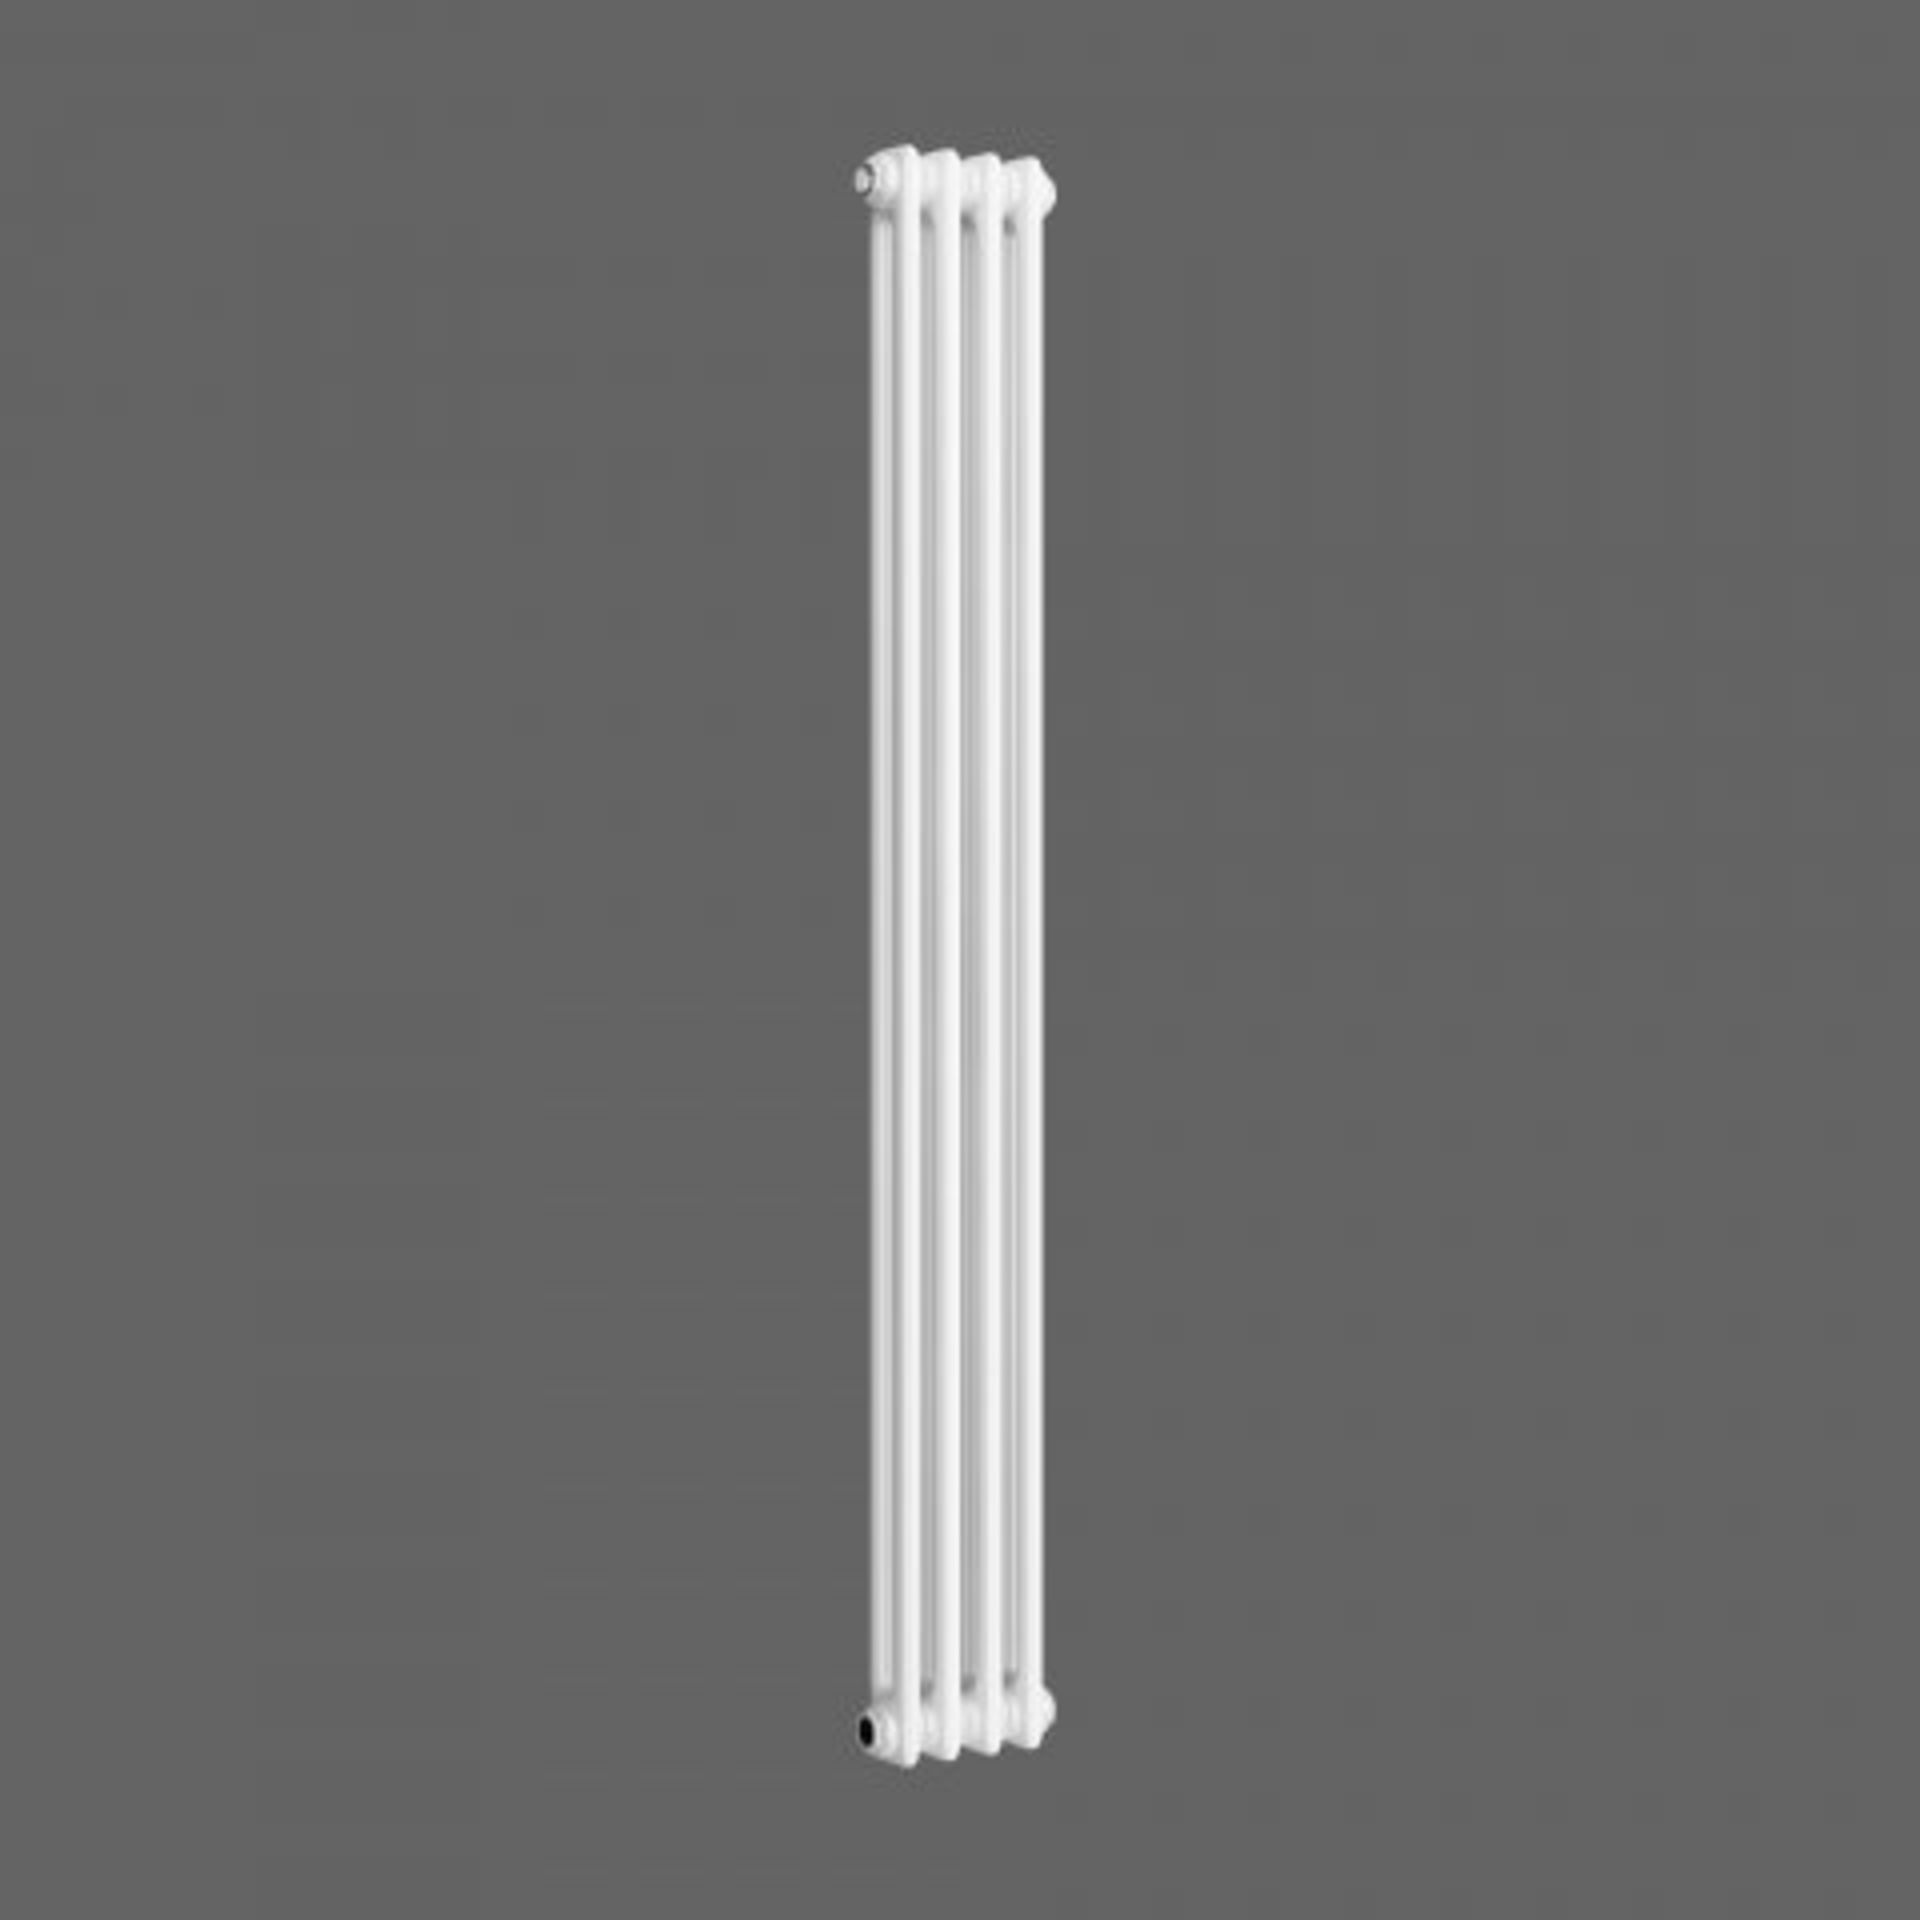 (I49) 1500x200mm White Double Panel Vertical Colosseum Radiator - Roma Premium Classic Touch For - Image 3 of 5